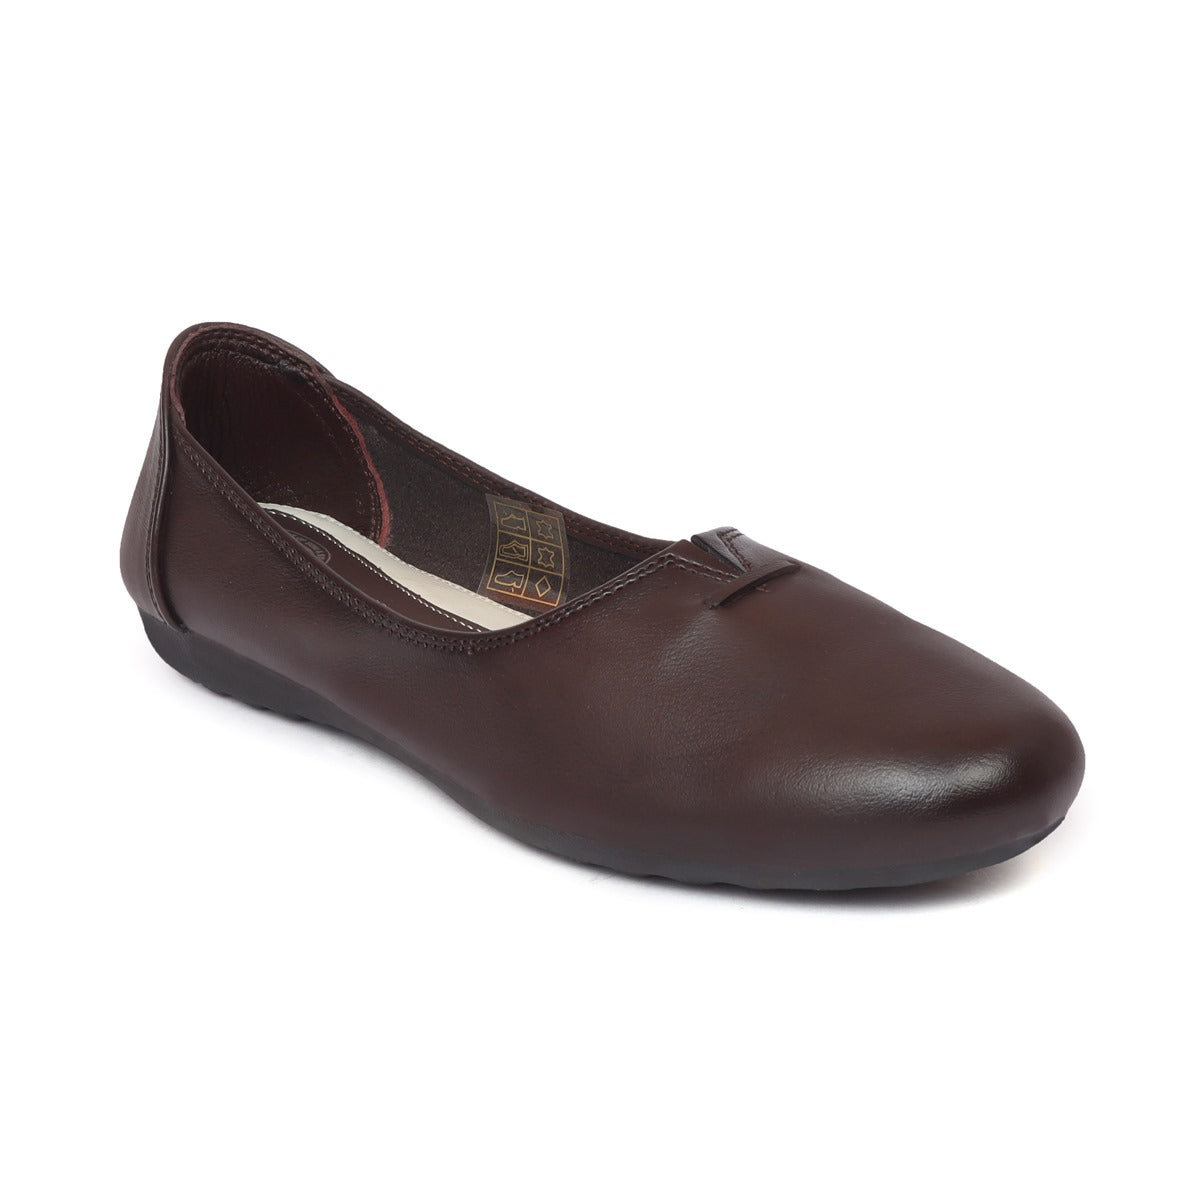 Bellies for women NV-111 brown